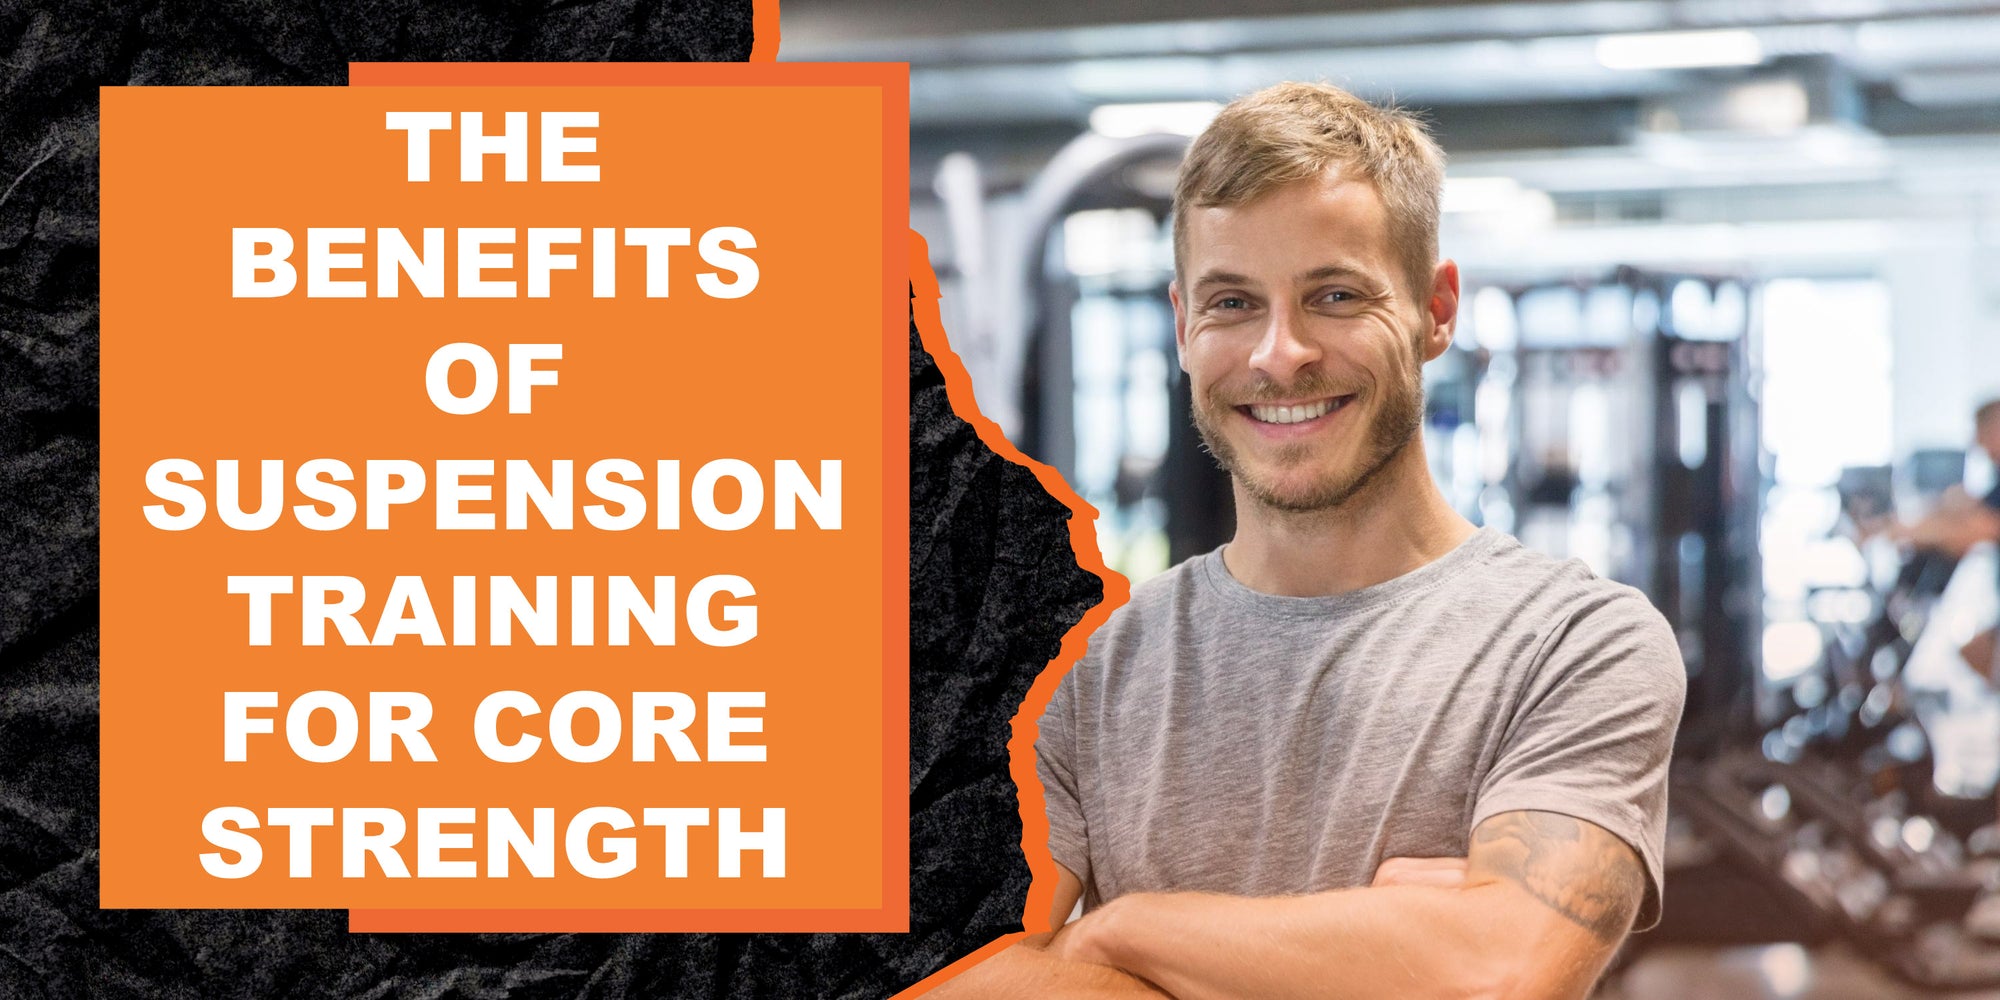 The Benefits of Suspension Training for Core Strength